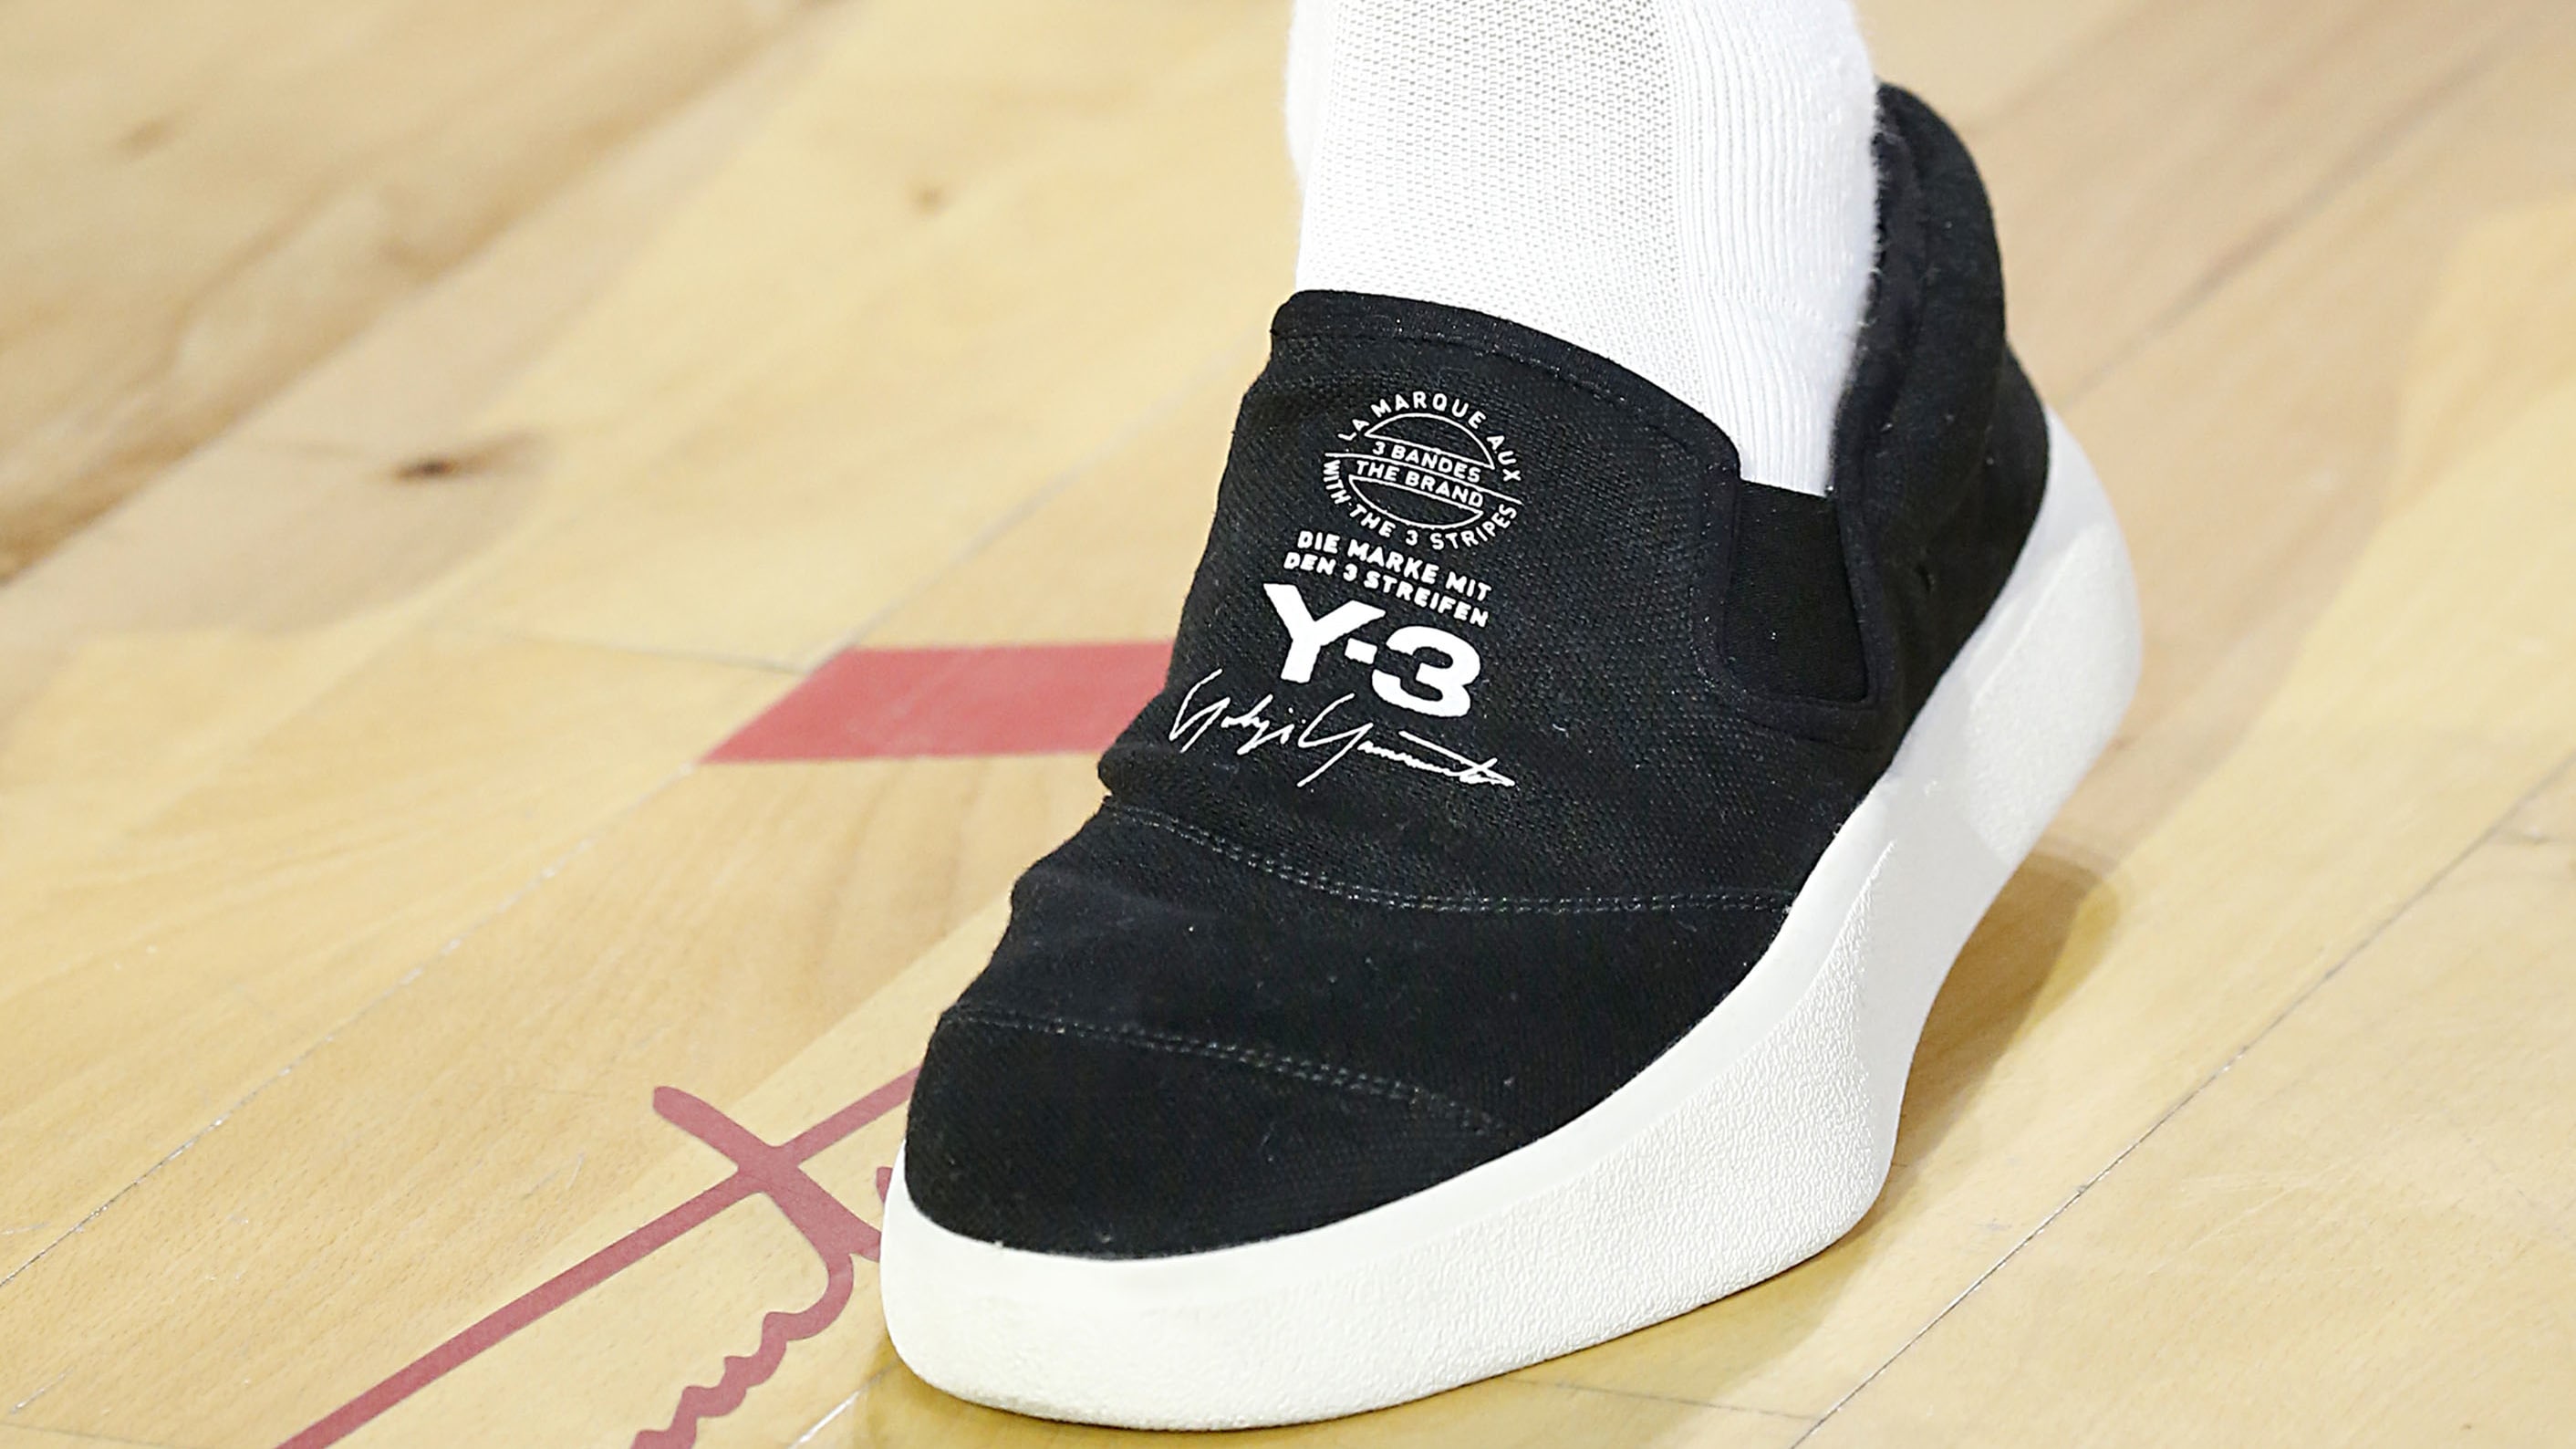 Adidas Y-3 Spring/Summer 2018 Collection Preview